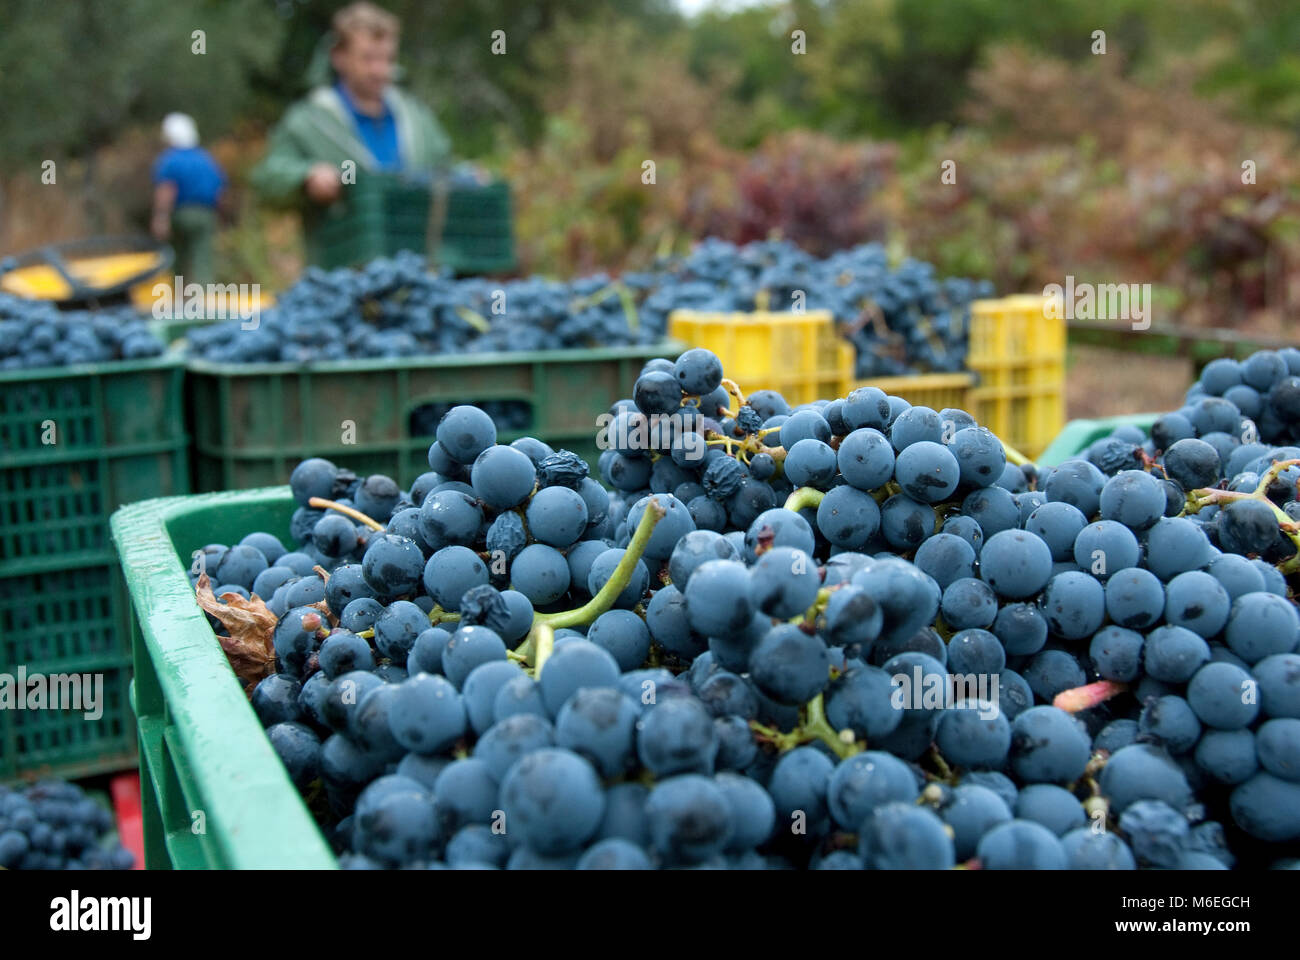 MEN COLLECTING GRAPES OF GRAPES FOR WINE, HARVESTING, TRANSPORTATION Stock Photo